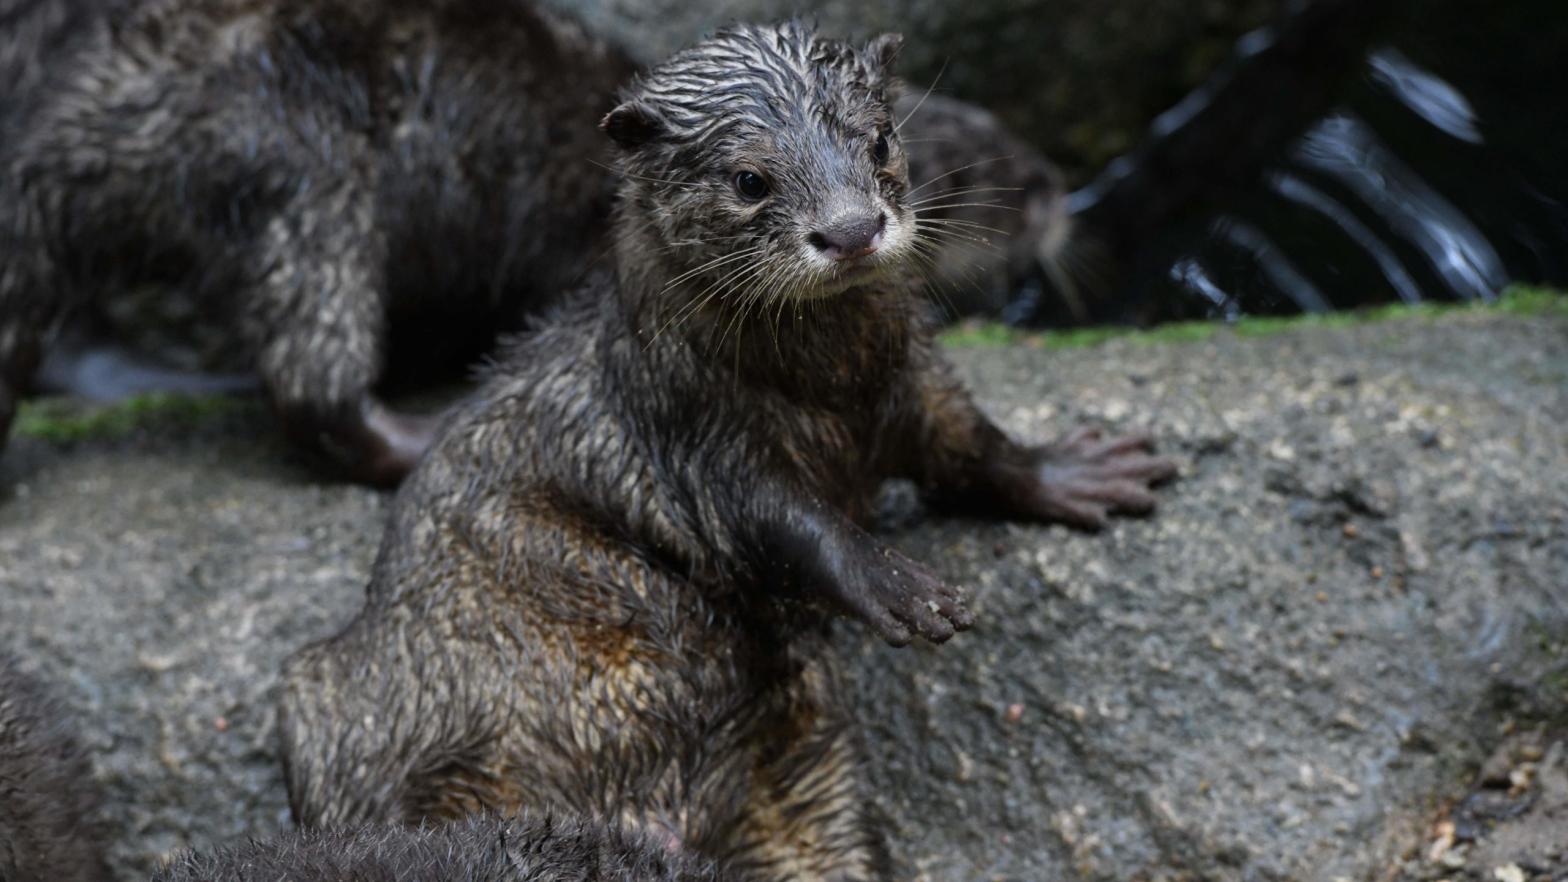 A juvenile Asian small-clawed otter at the Singapore Zoological Garden on January 11, 2018. (Photo: Roslan Rahman, Getty Images)